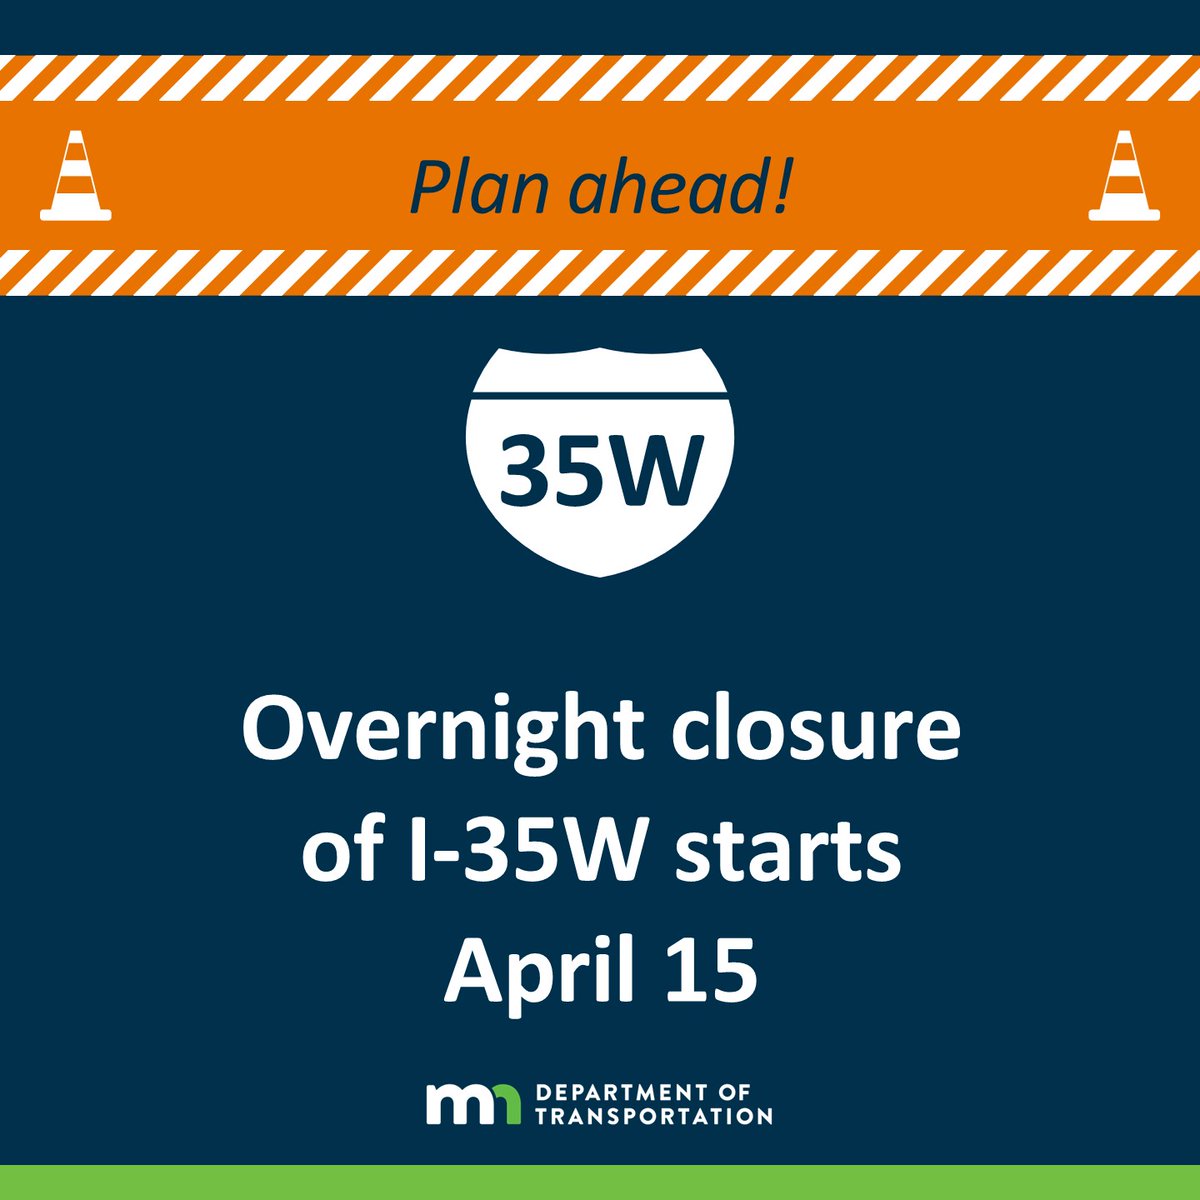 I-35W in Richfield/Bloomington: I-35W is closed in both directions at the I-35W/I-494 interchange from 9pm Mon (4/15) to 5am Tue (4/16) to pour the concrete deck for the flyover ramp. More info: bit.ly/435E6Q1 @bloomington_mn @EdinaMN @CityofRichfield @Hennepin